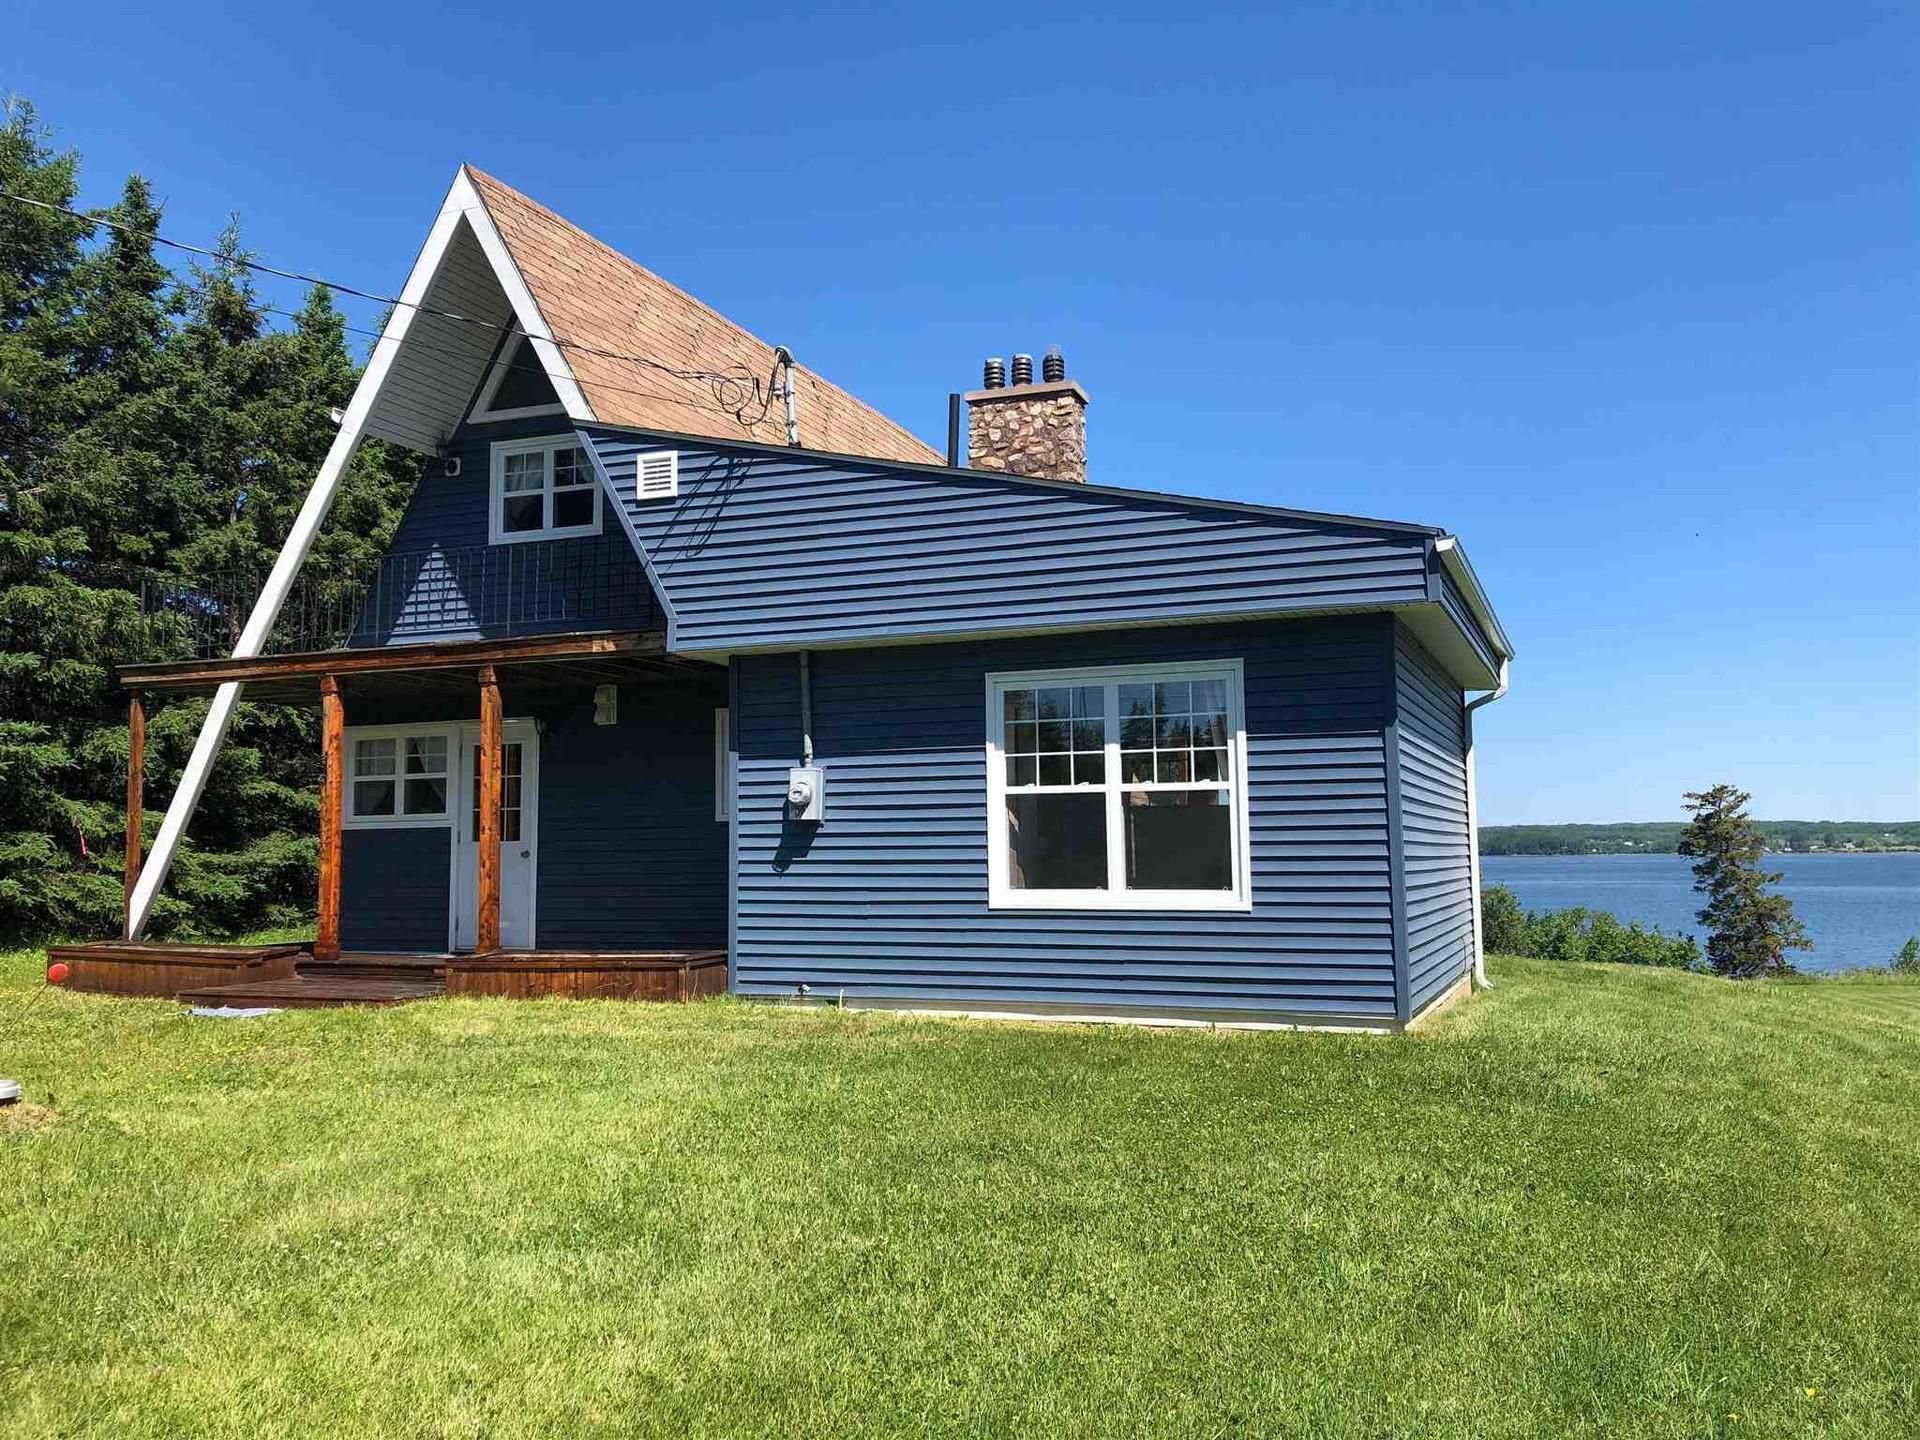 This Gorgeous Nova Scotia Home Has A 3,000-Foot Oceanside Trail & It Only Costs $325K